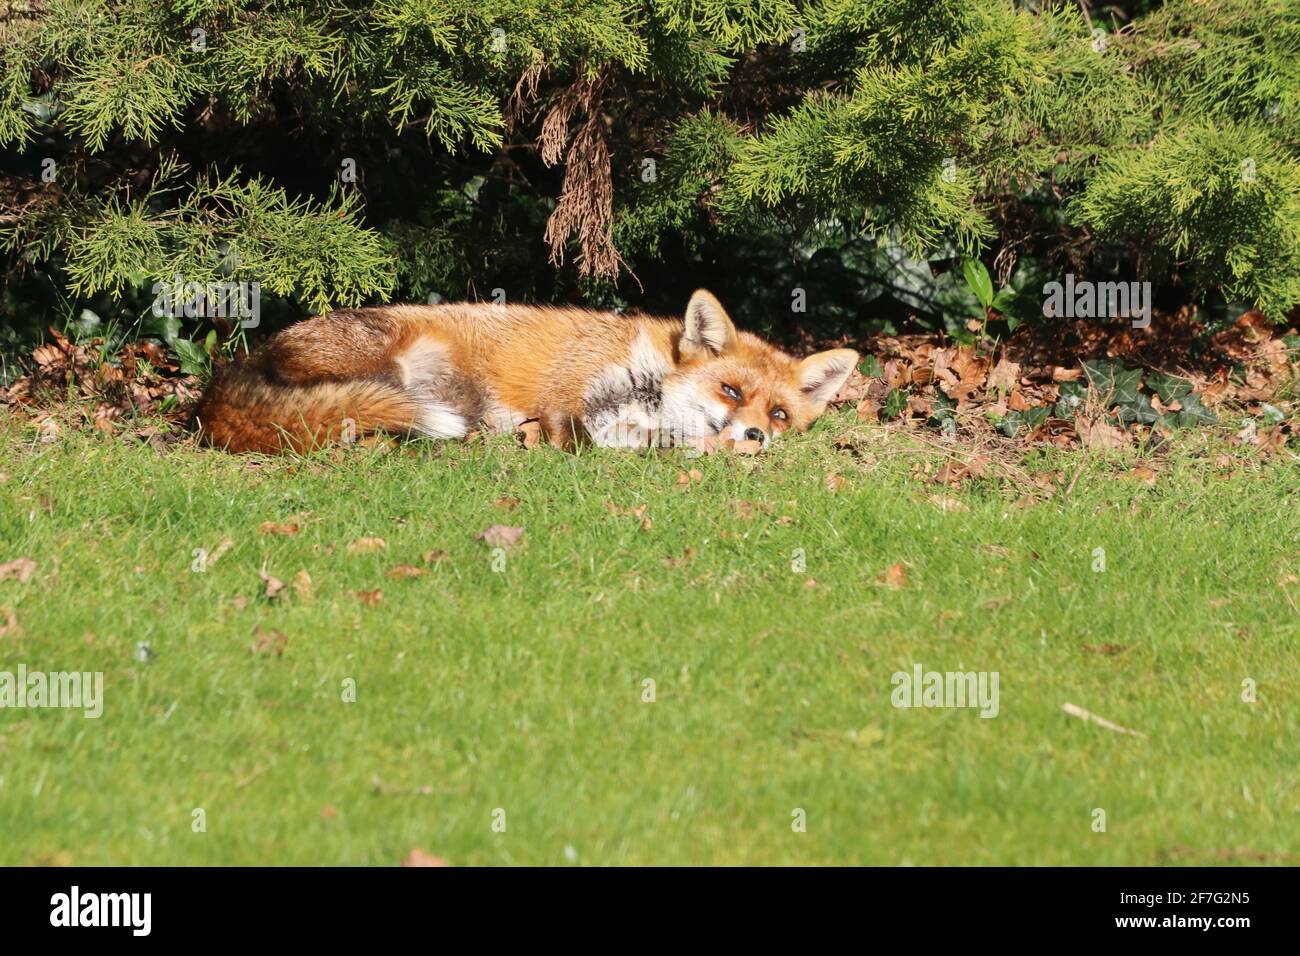 Fox lying down, eyes just open, looking, in sun under trees on grass in back garden, ear pricked up Stock Photo